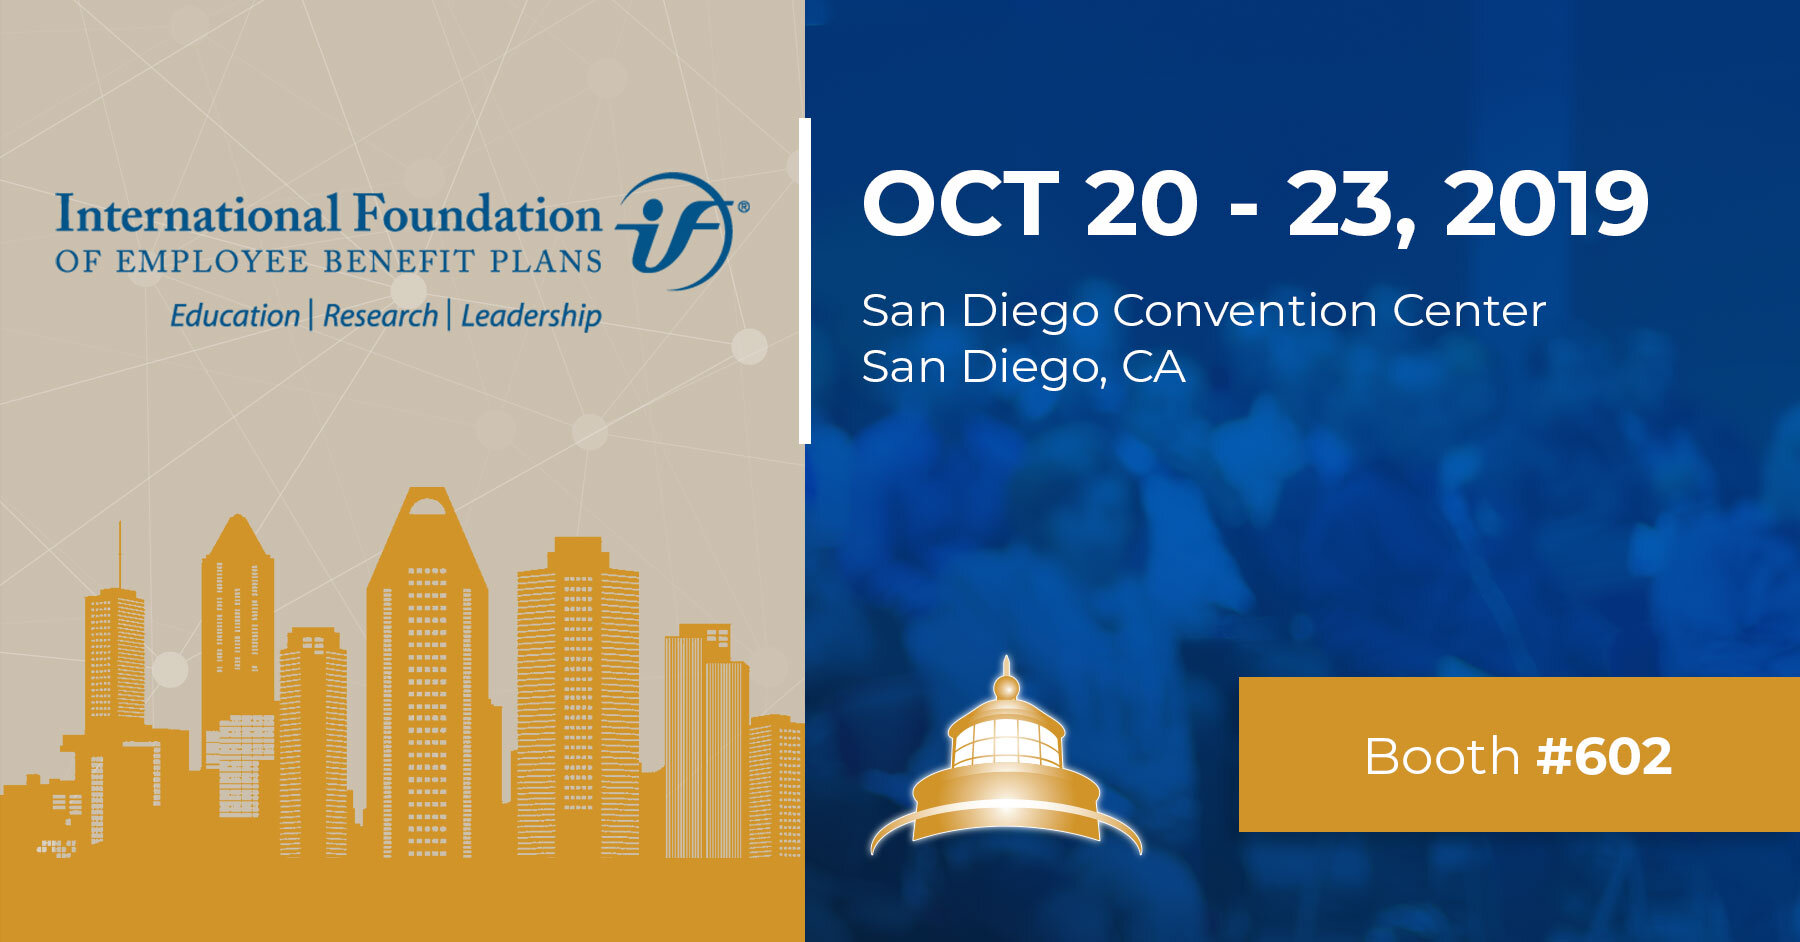 Join Us in San Diego for the 2019 IFEBP Employee Benefit Conference